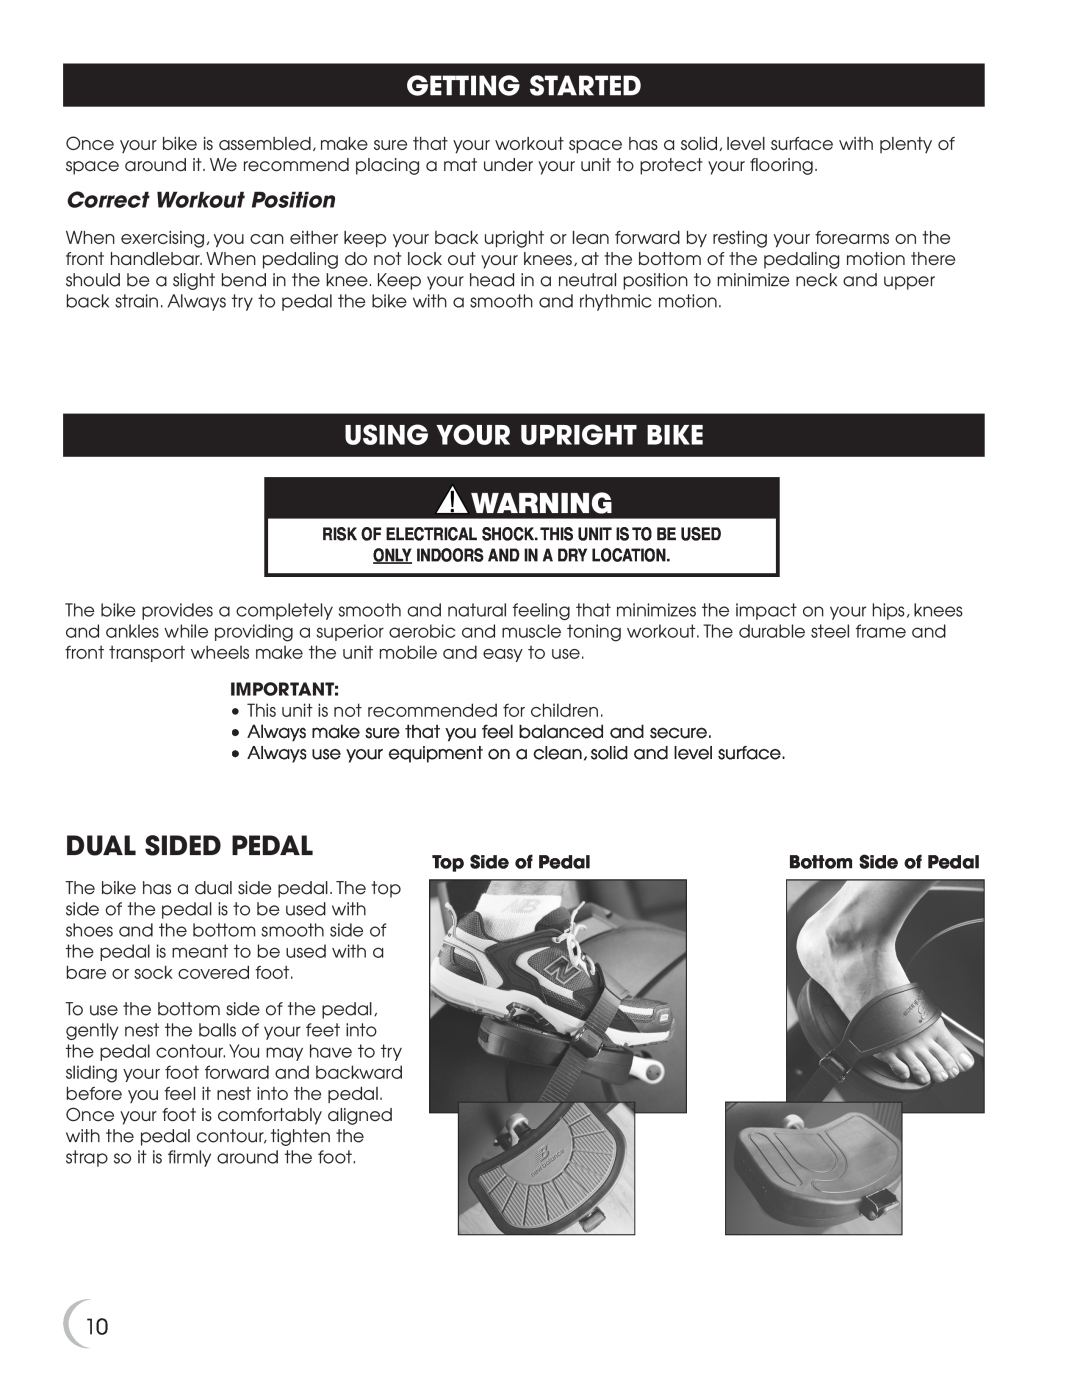 New Balance 5K 5100 owner manual Getting Started, Using Your Upright Bike, Dual Sided Pedal, Correct Workout Position 